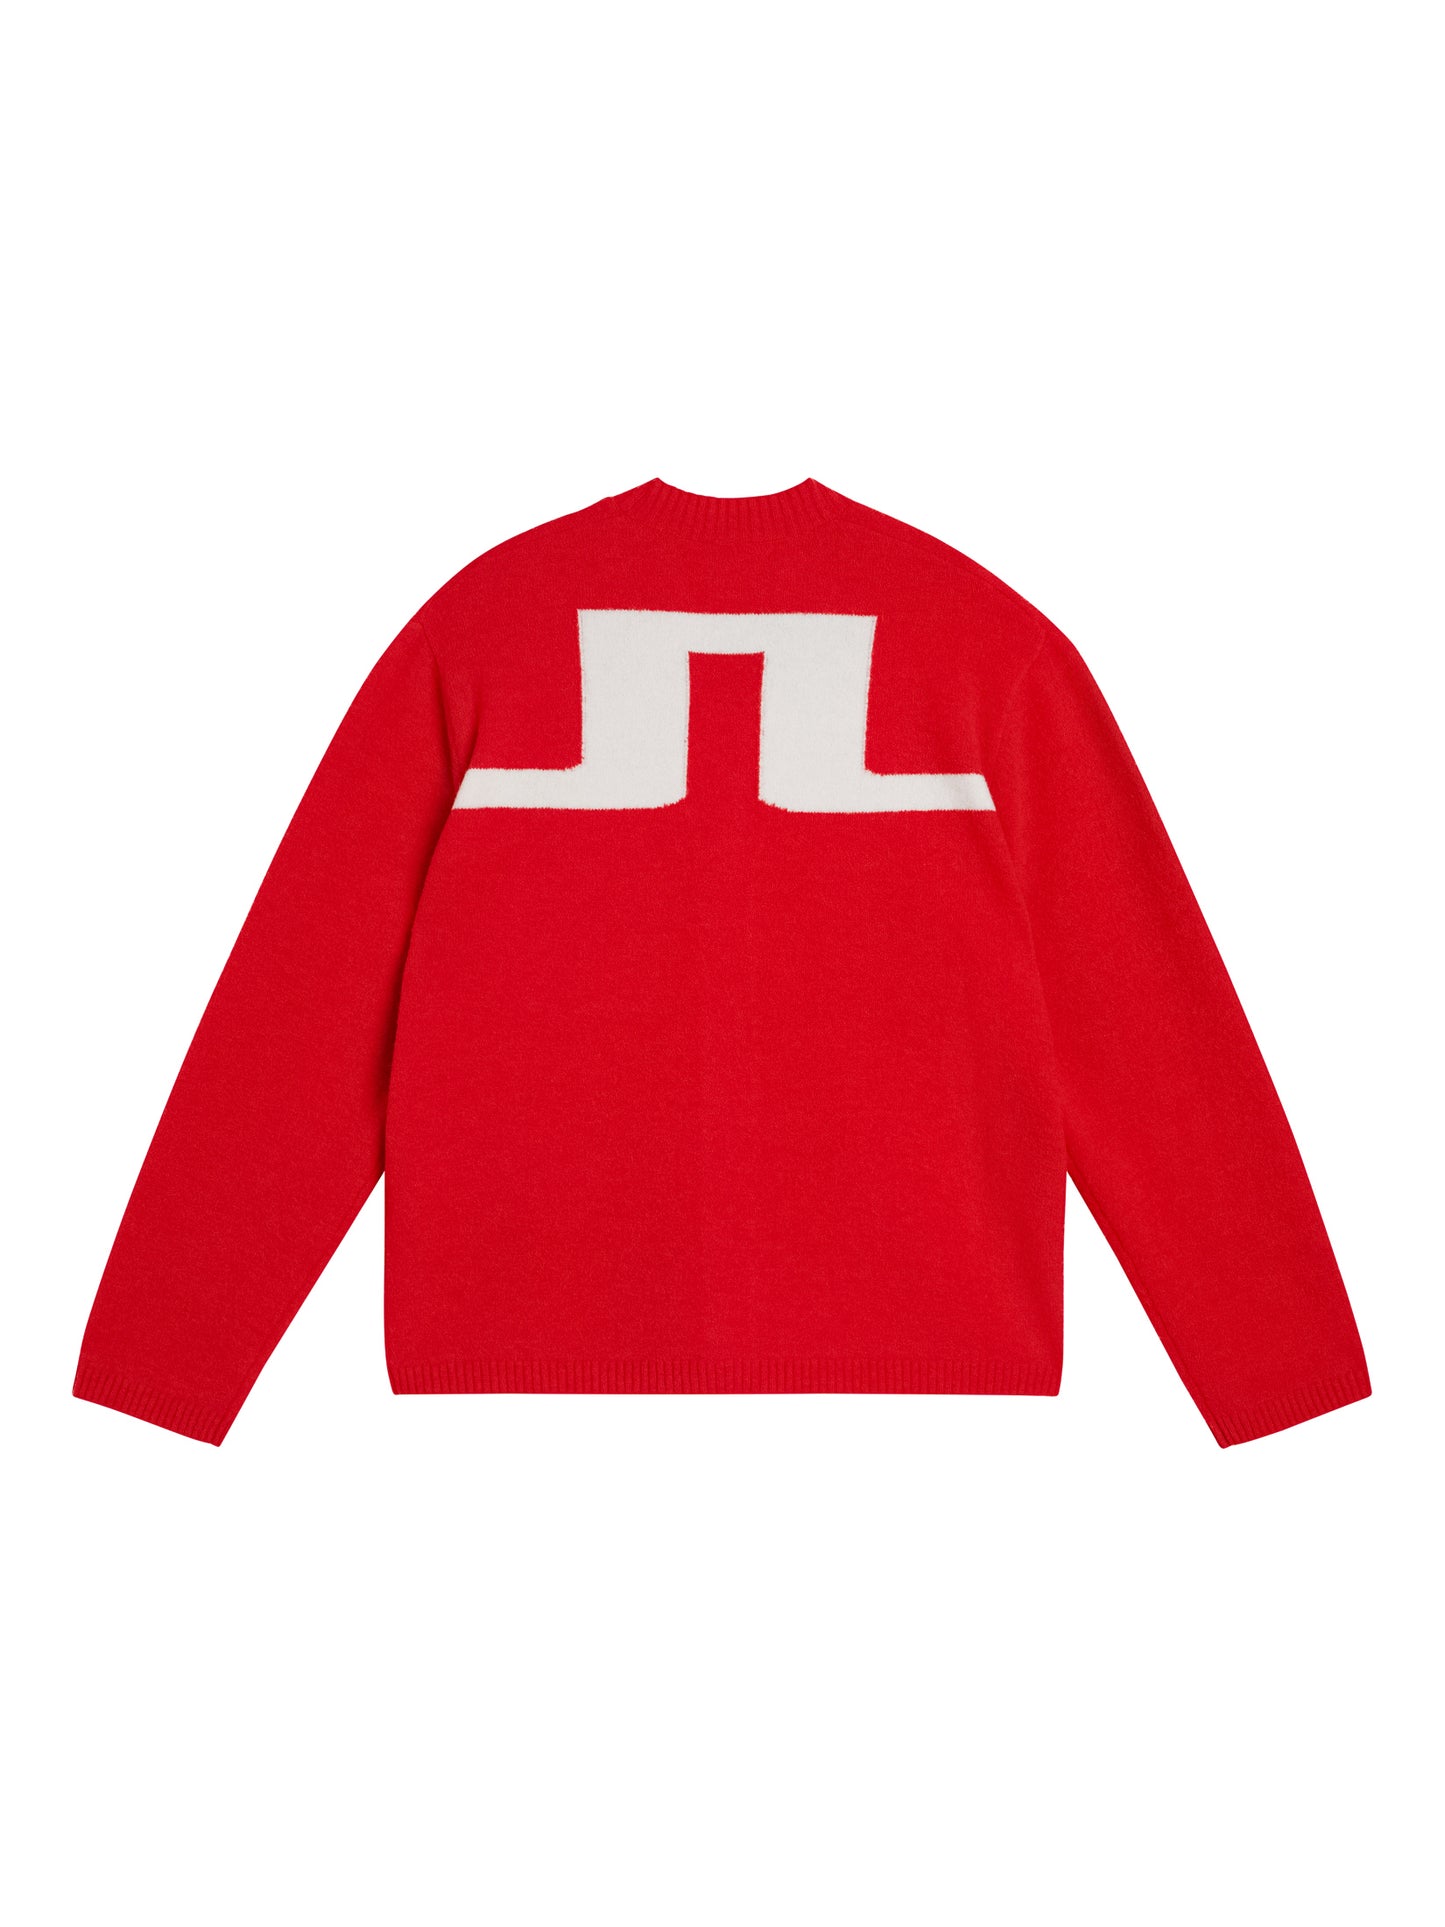 Clarke Knitted Cardigan / Fiery Red – J.Lindeberg